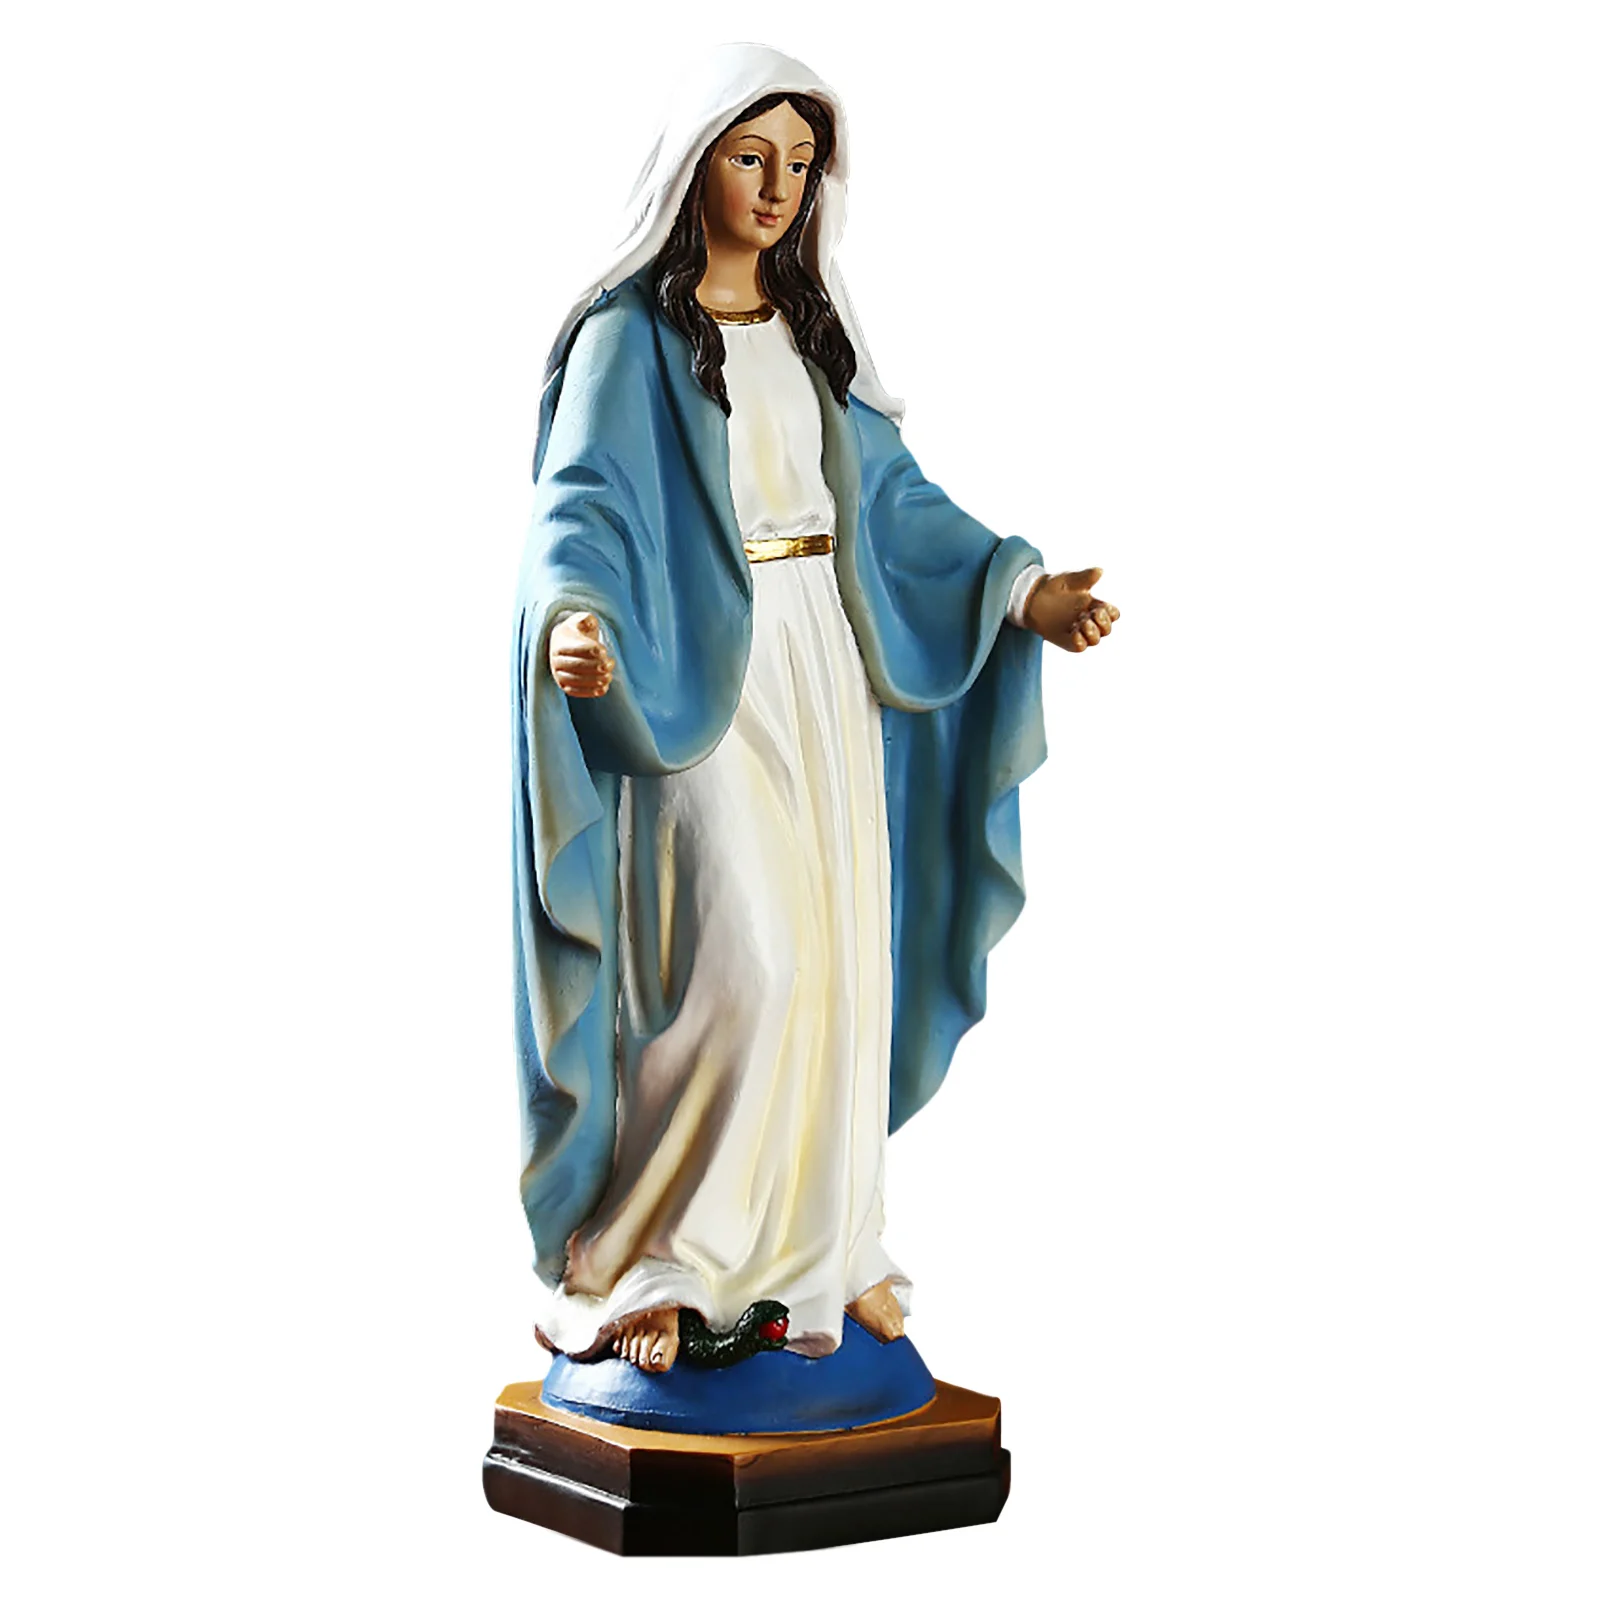 

Our Lady Of Grace Blessed Statue Virgin Mary Statue 8.8 Catholic Religious Gifts Resin Colored Statue Figurine Garden Catholic